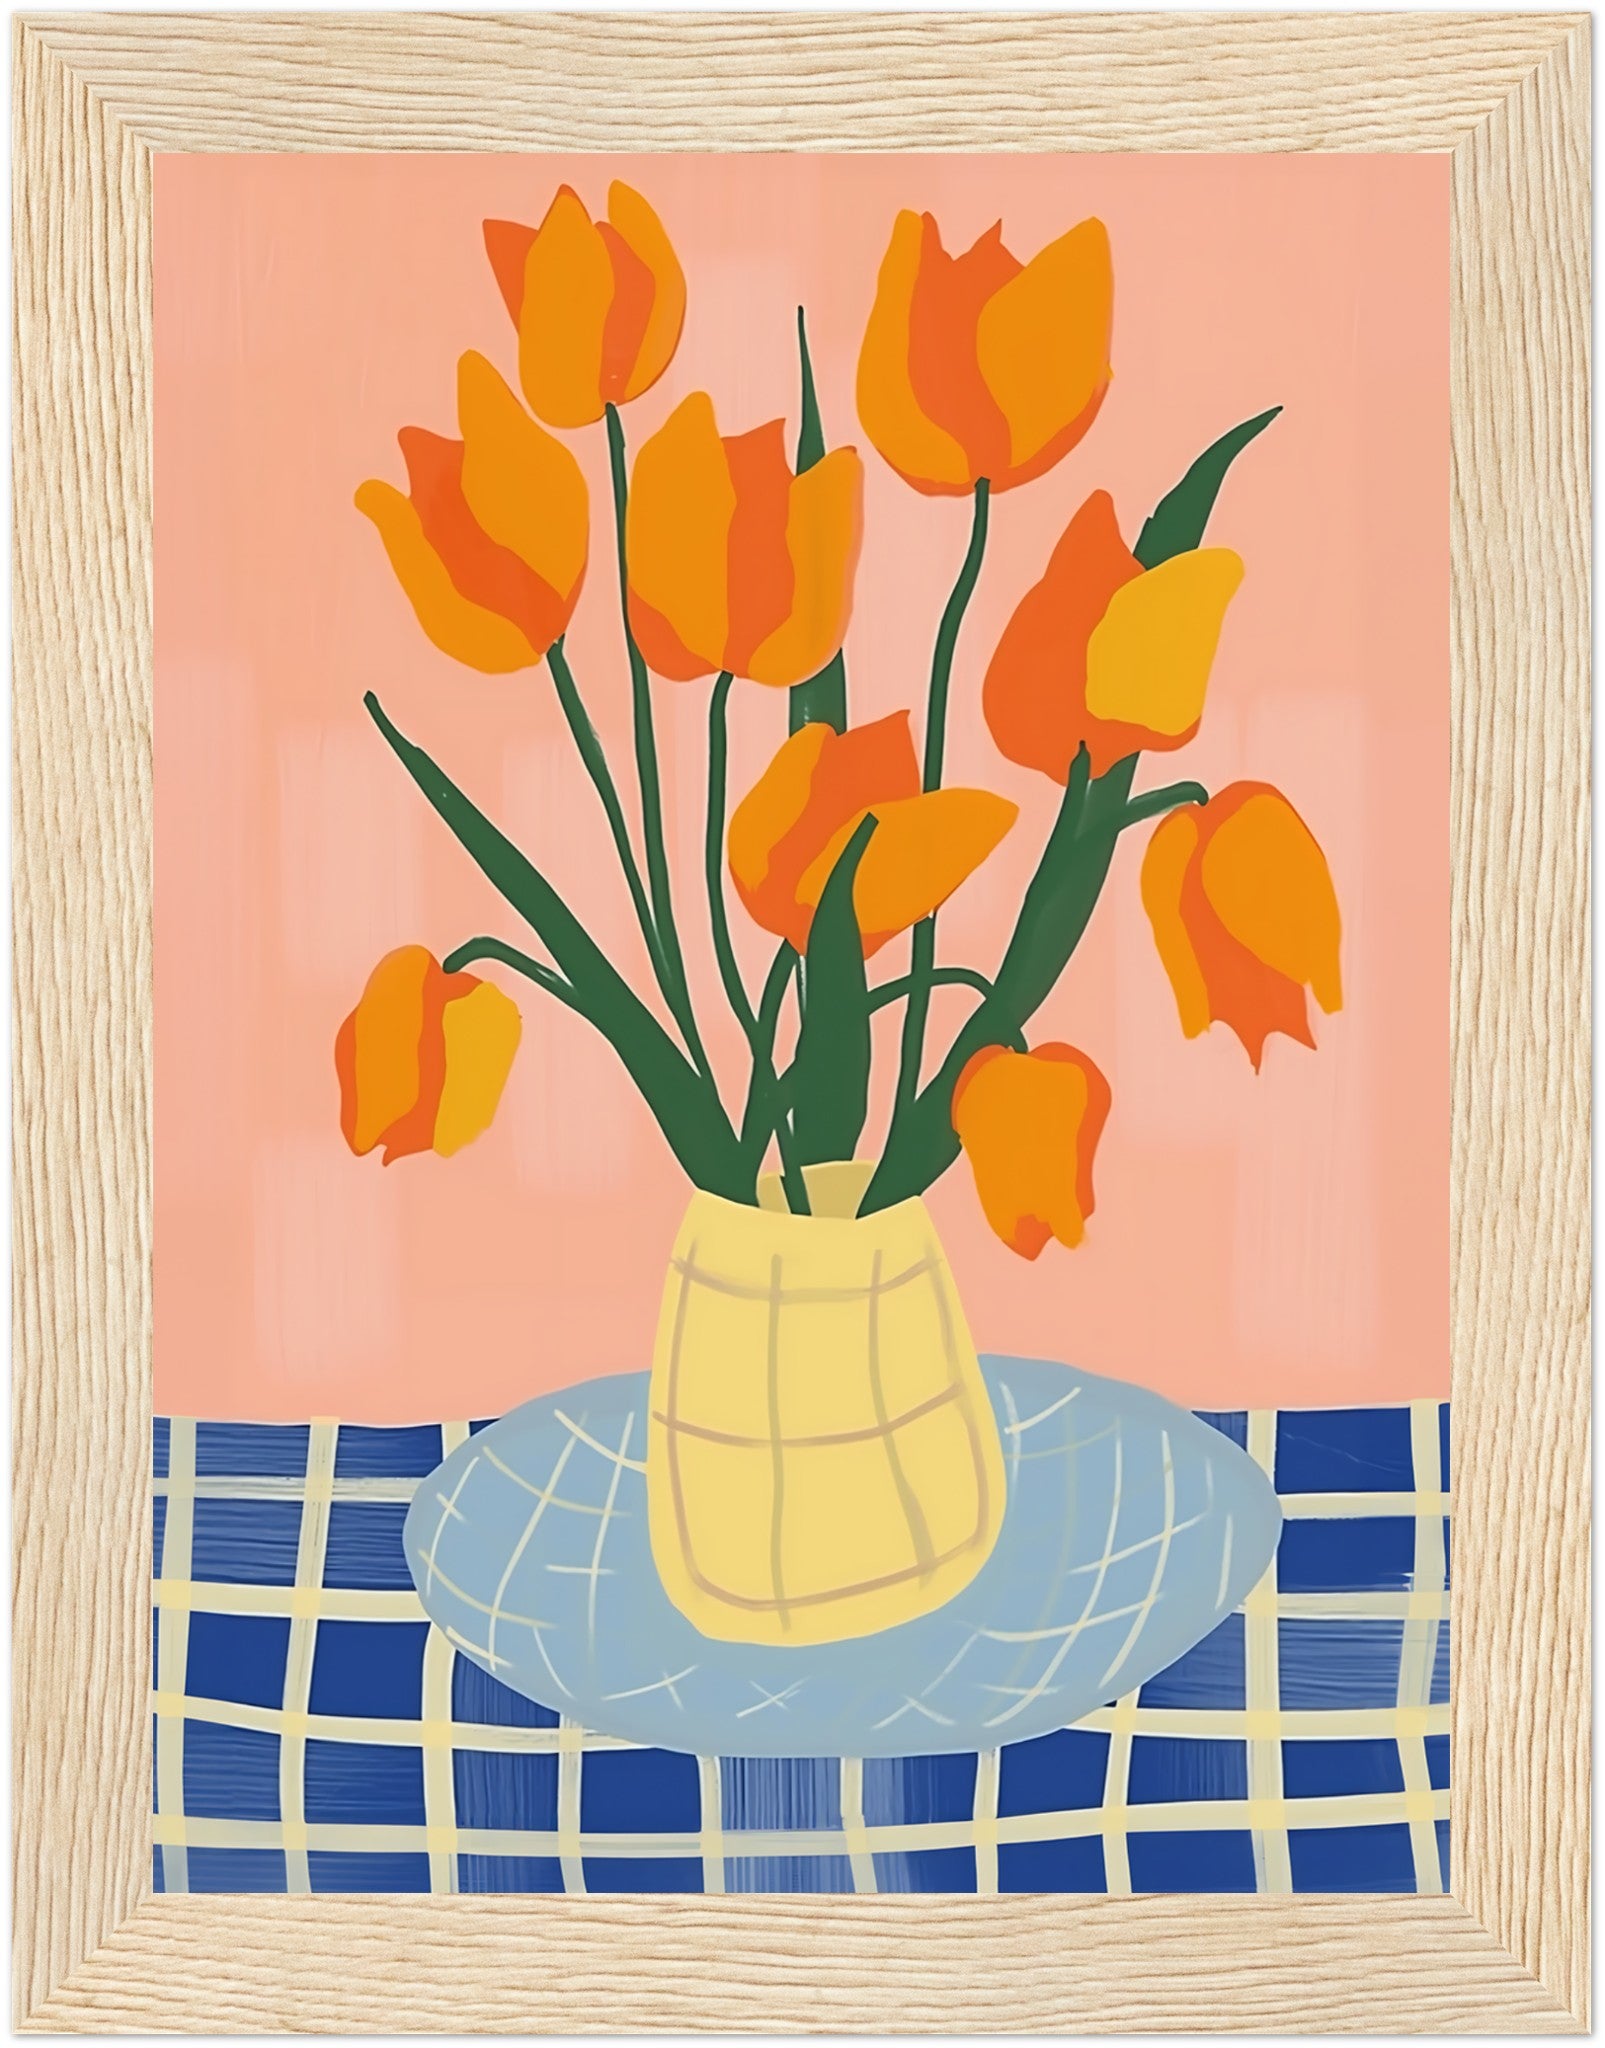 Stylized painting of orange tulips in a yellow vase on a blue checkered table.